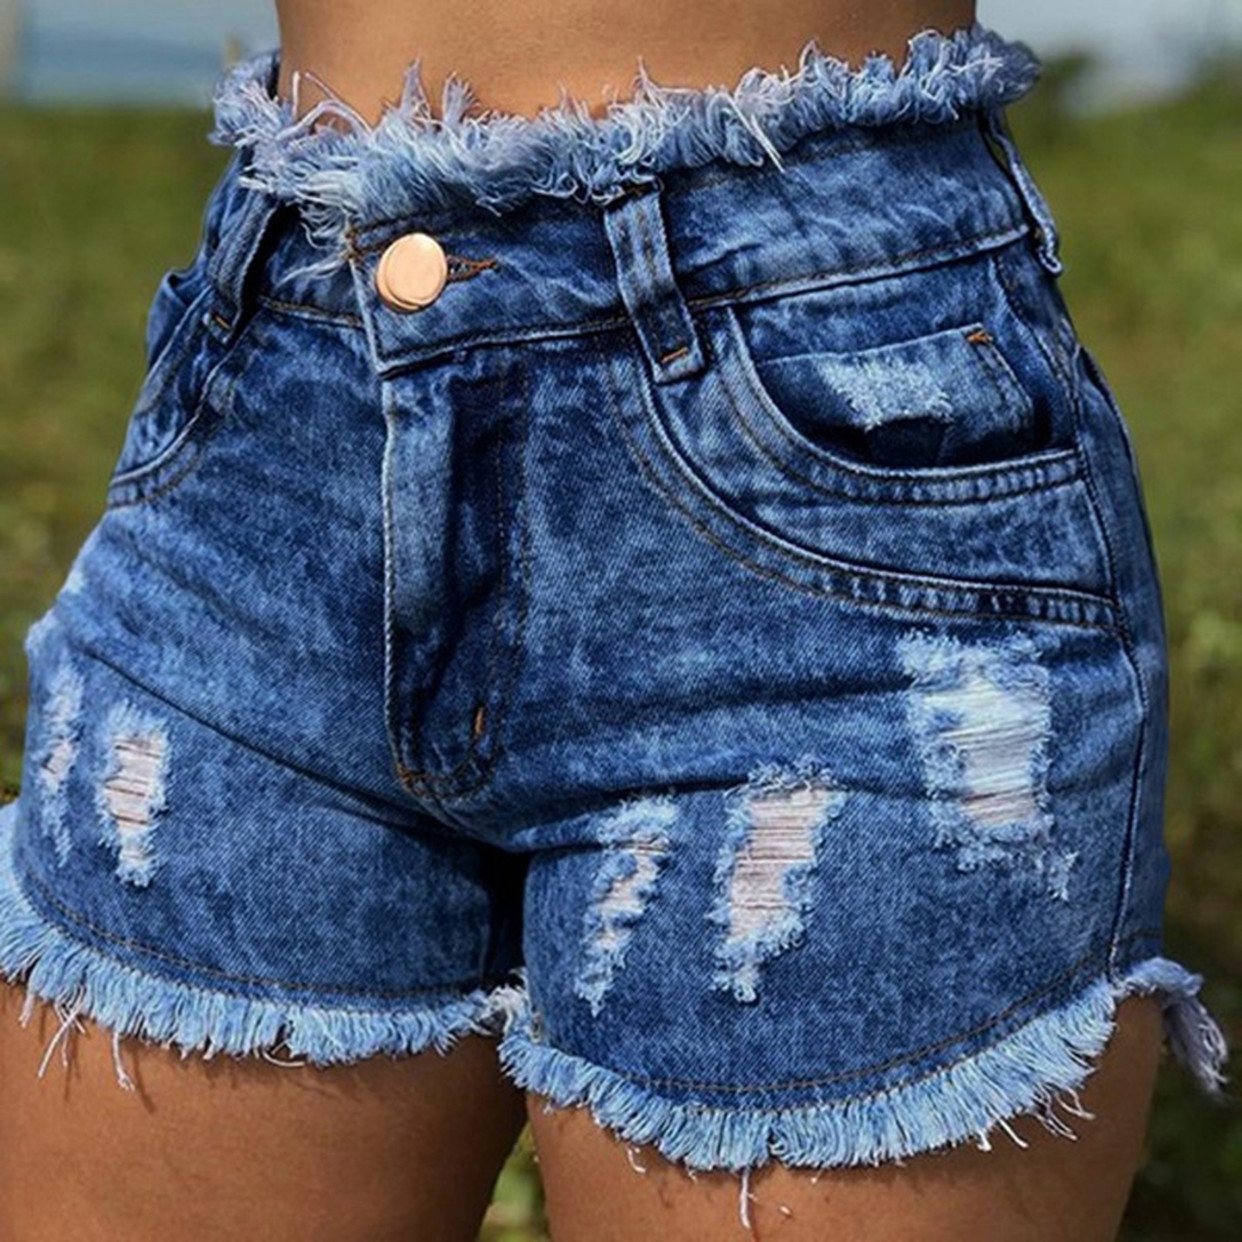 Vintage Ripped Fringed Women&s Denim Shorts 2021 Summer Fashion Trend Jeans for Women